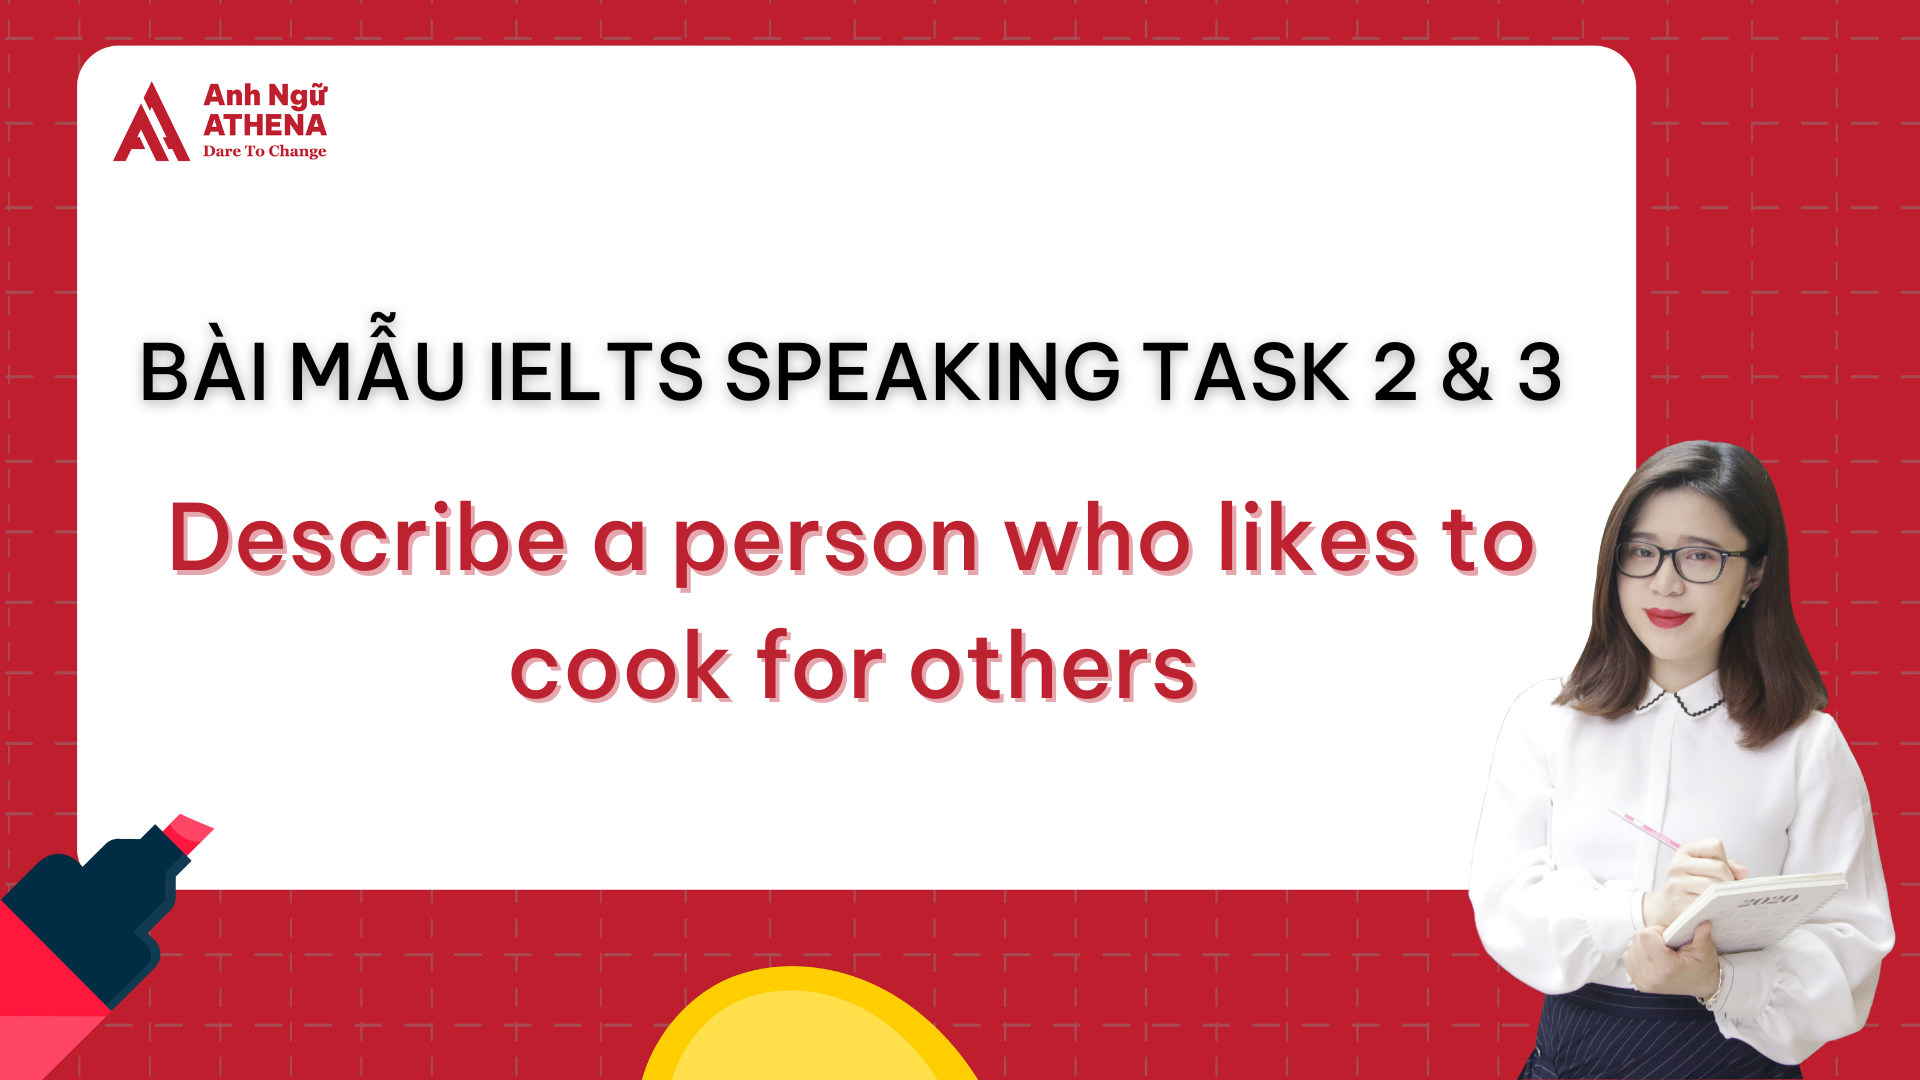 Bài mẫu IELTS Speaking Part 2 & 3 - Topic: Describe a person who likes to cook for others